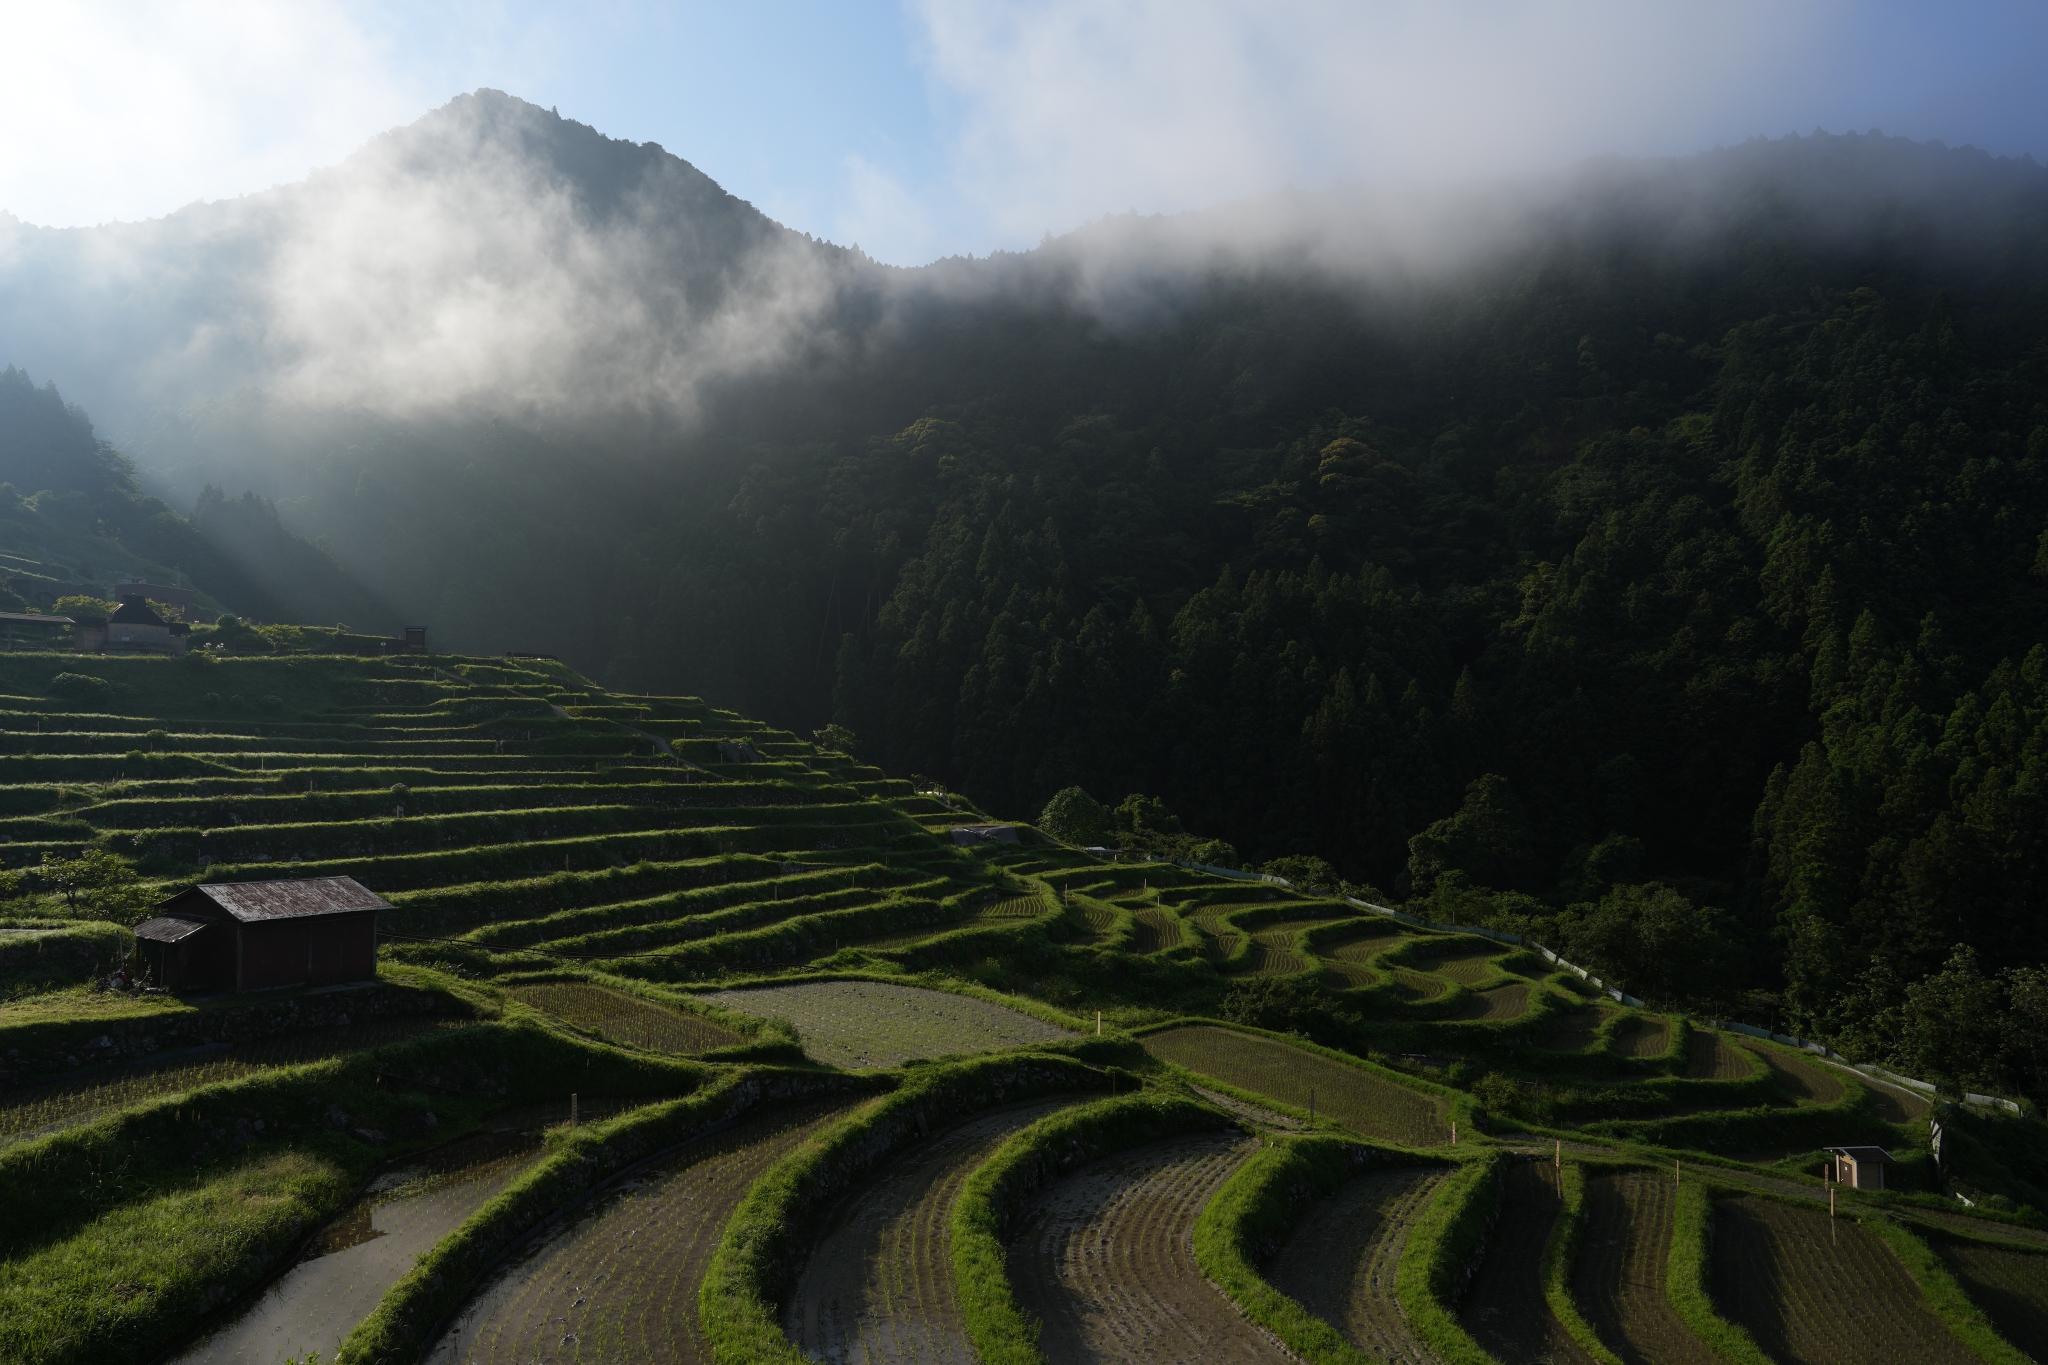 Green farming terraces with cloud-shrouded mountains in the background